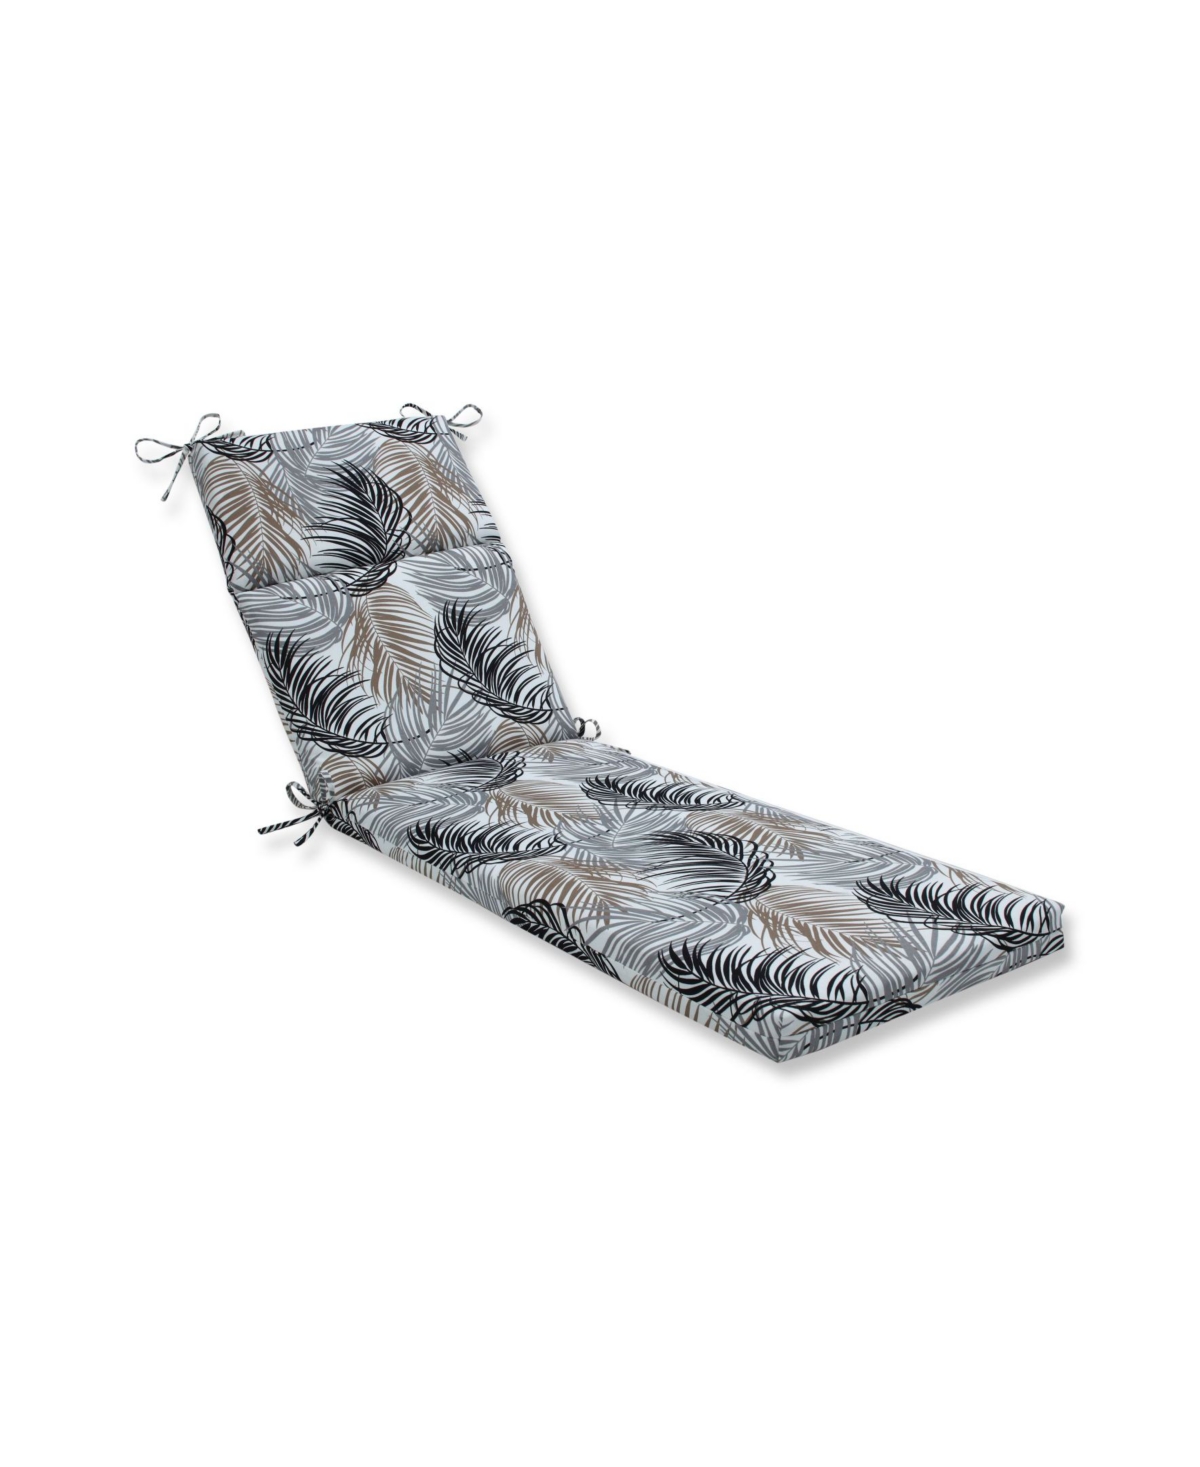 Printed Outdoor Chaise Lounge Cushion - Red Stripe